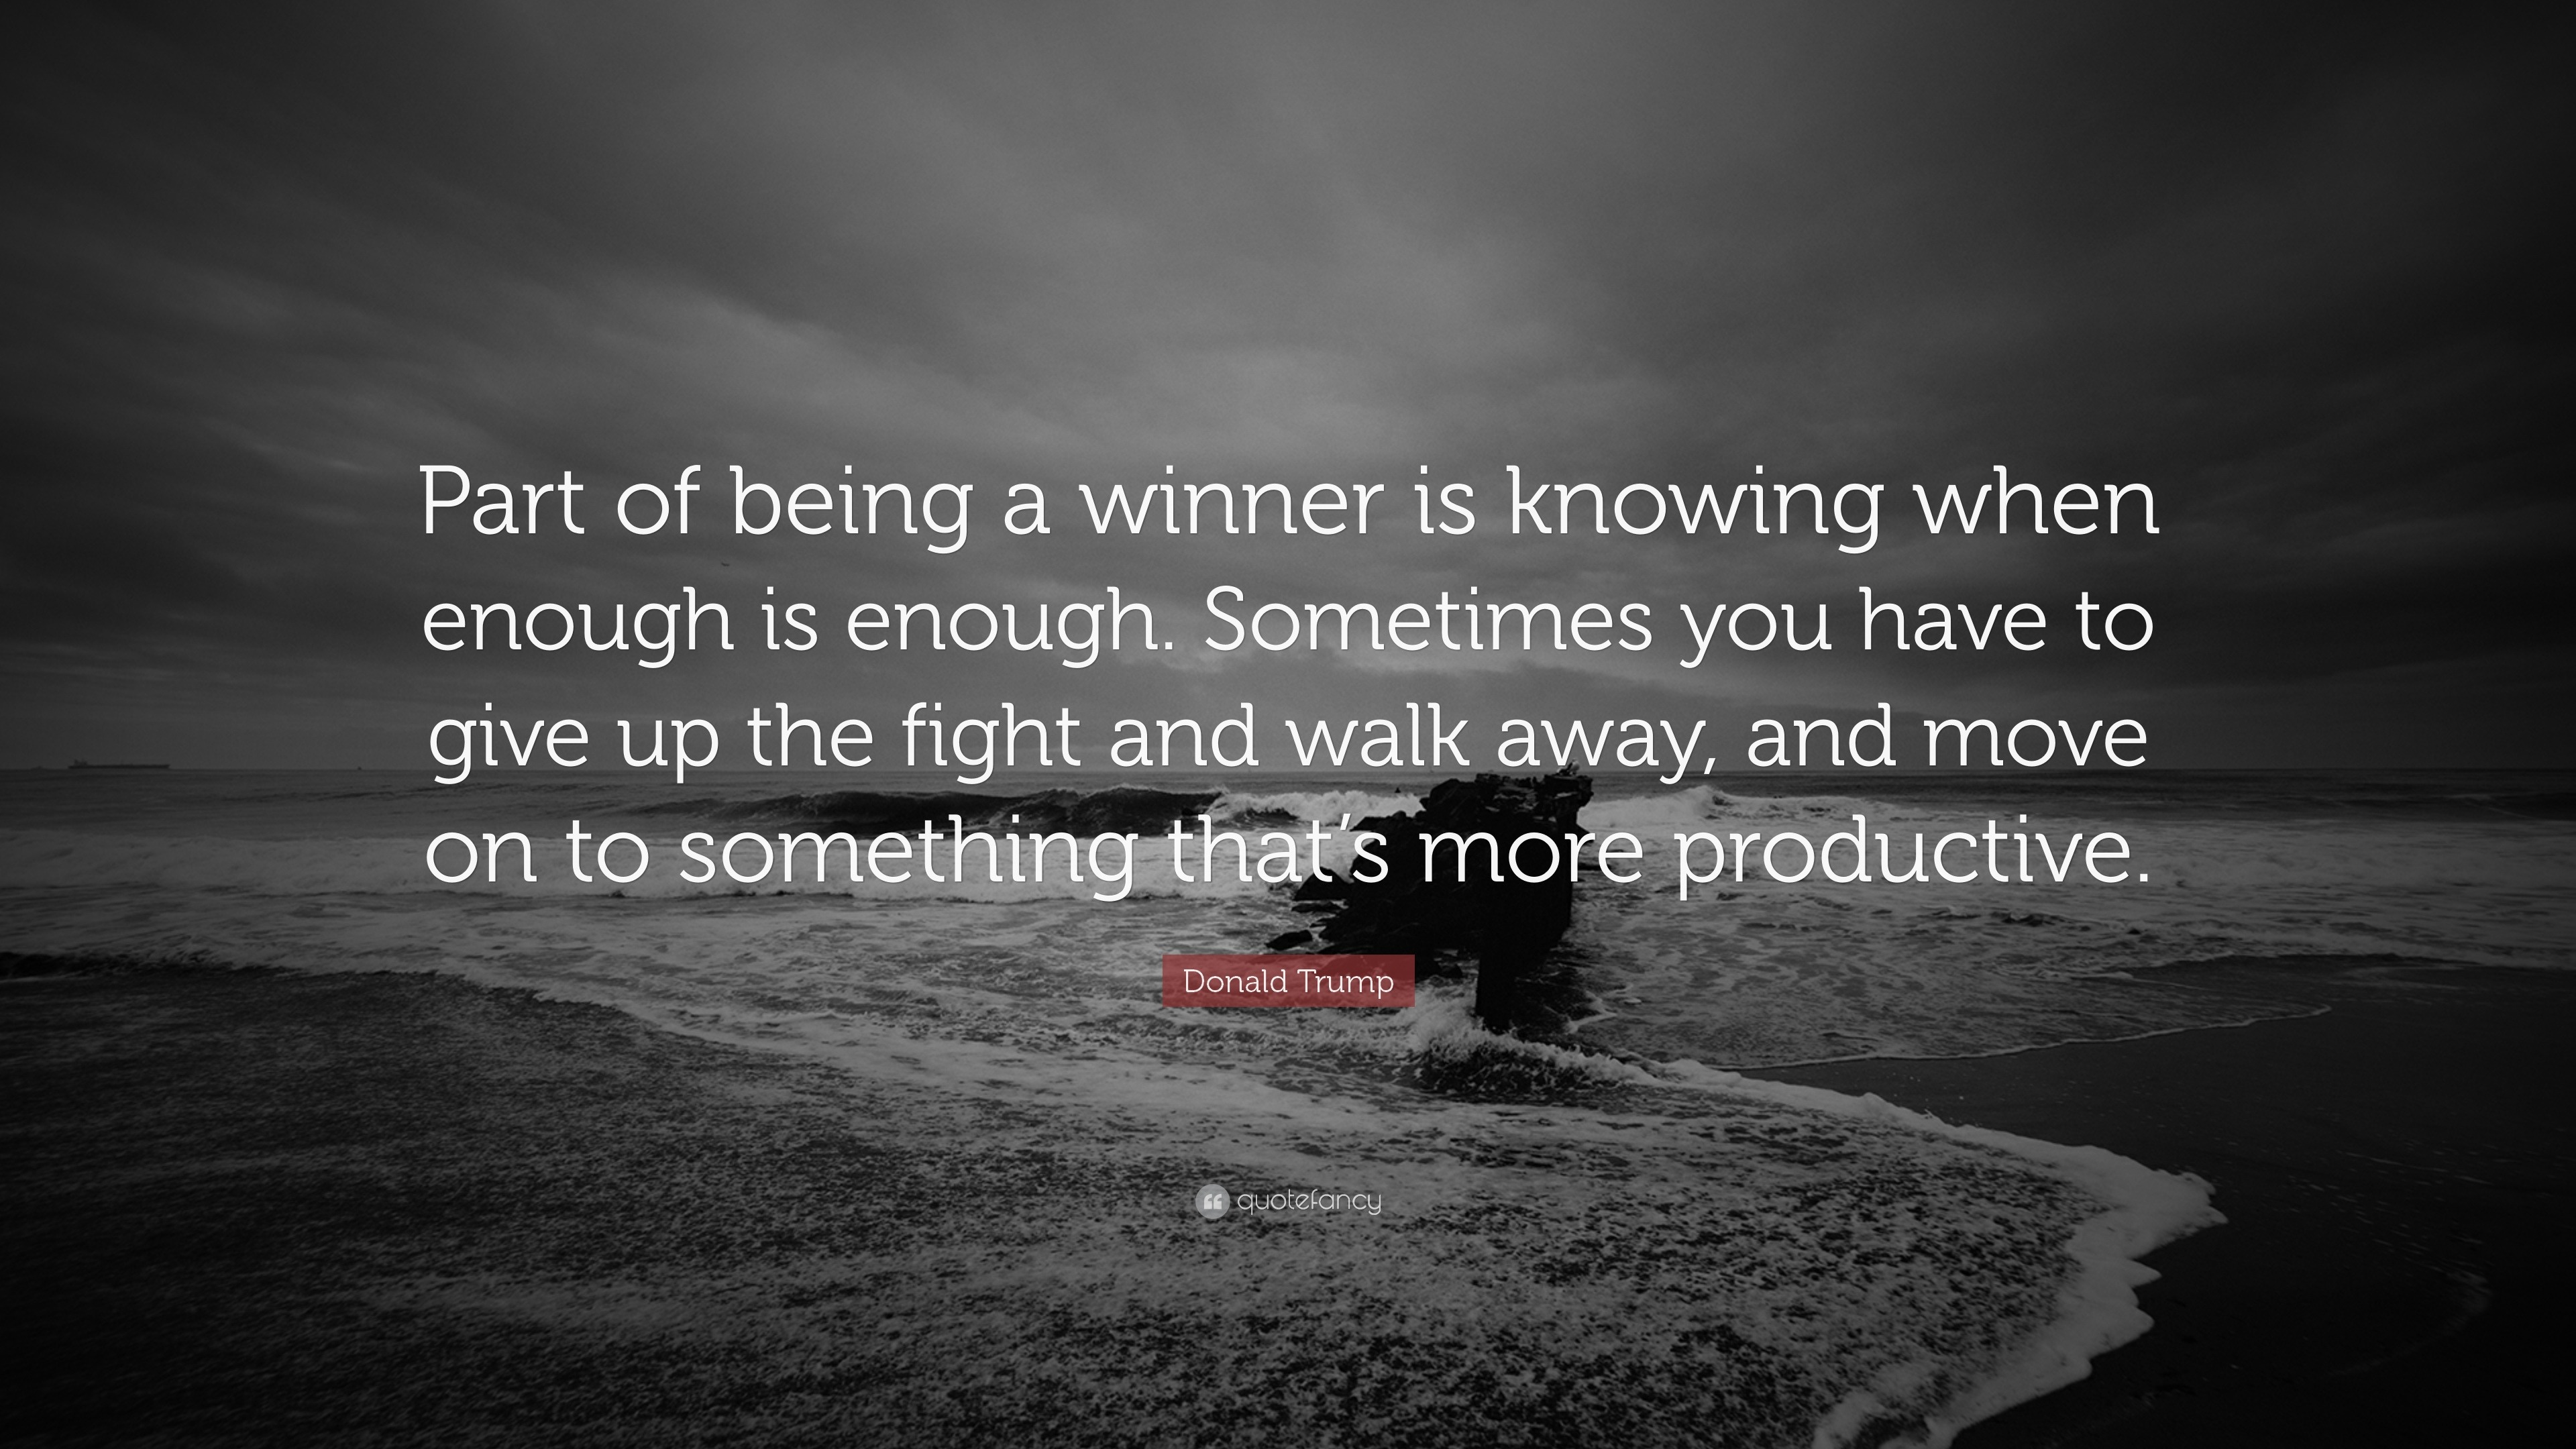 Donald Trump Quote: “Part of being a winner is knowing when enough is